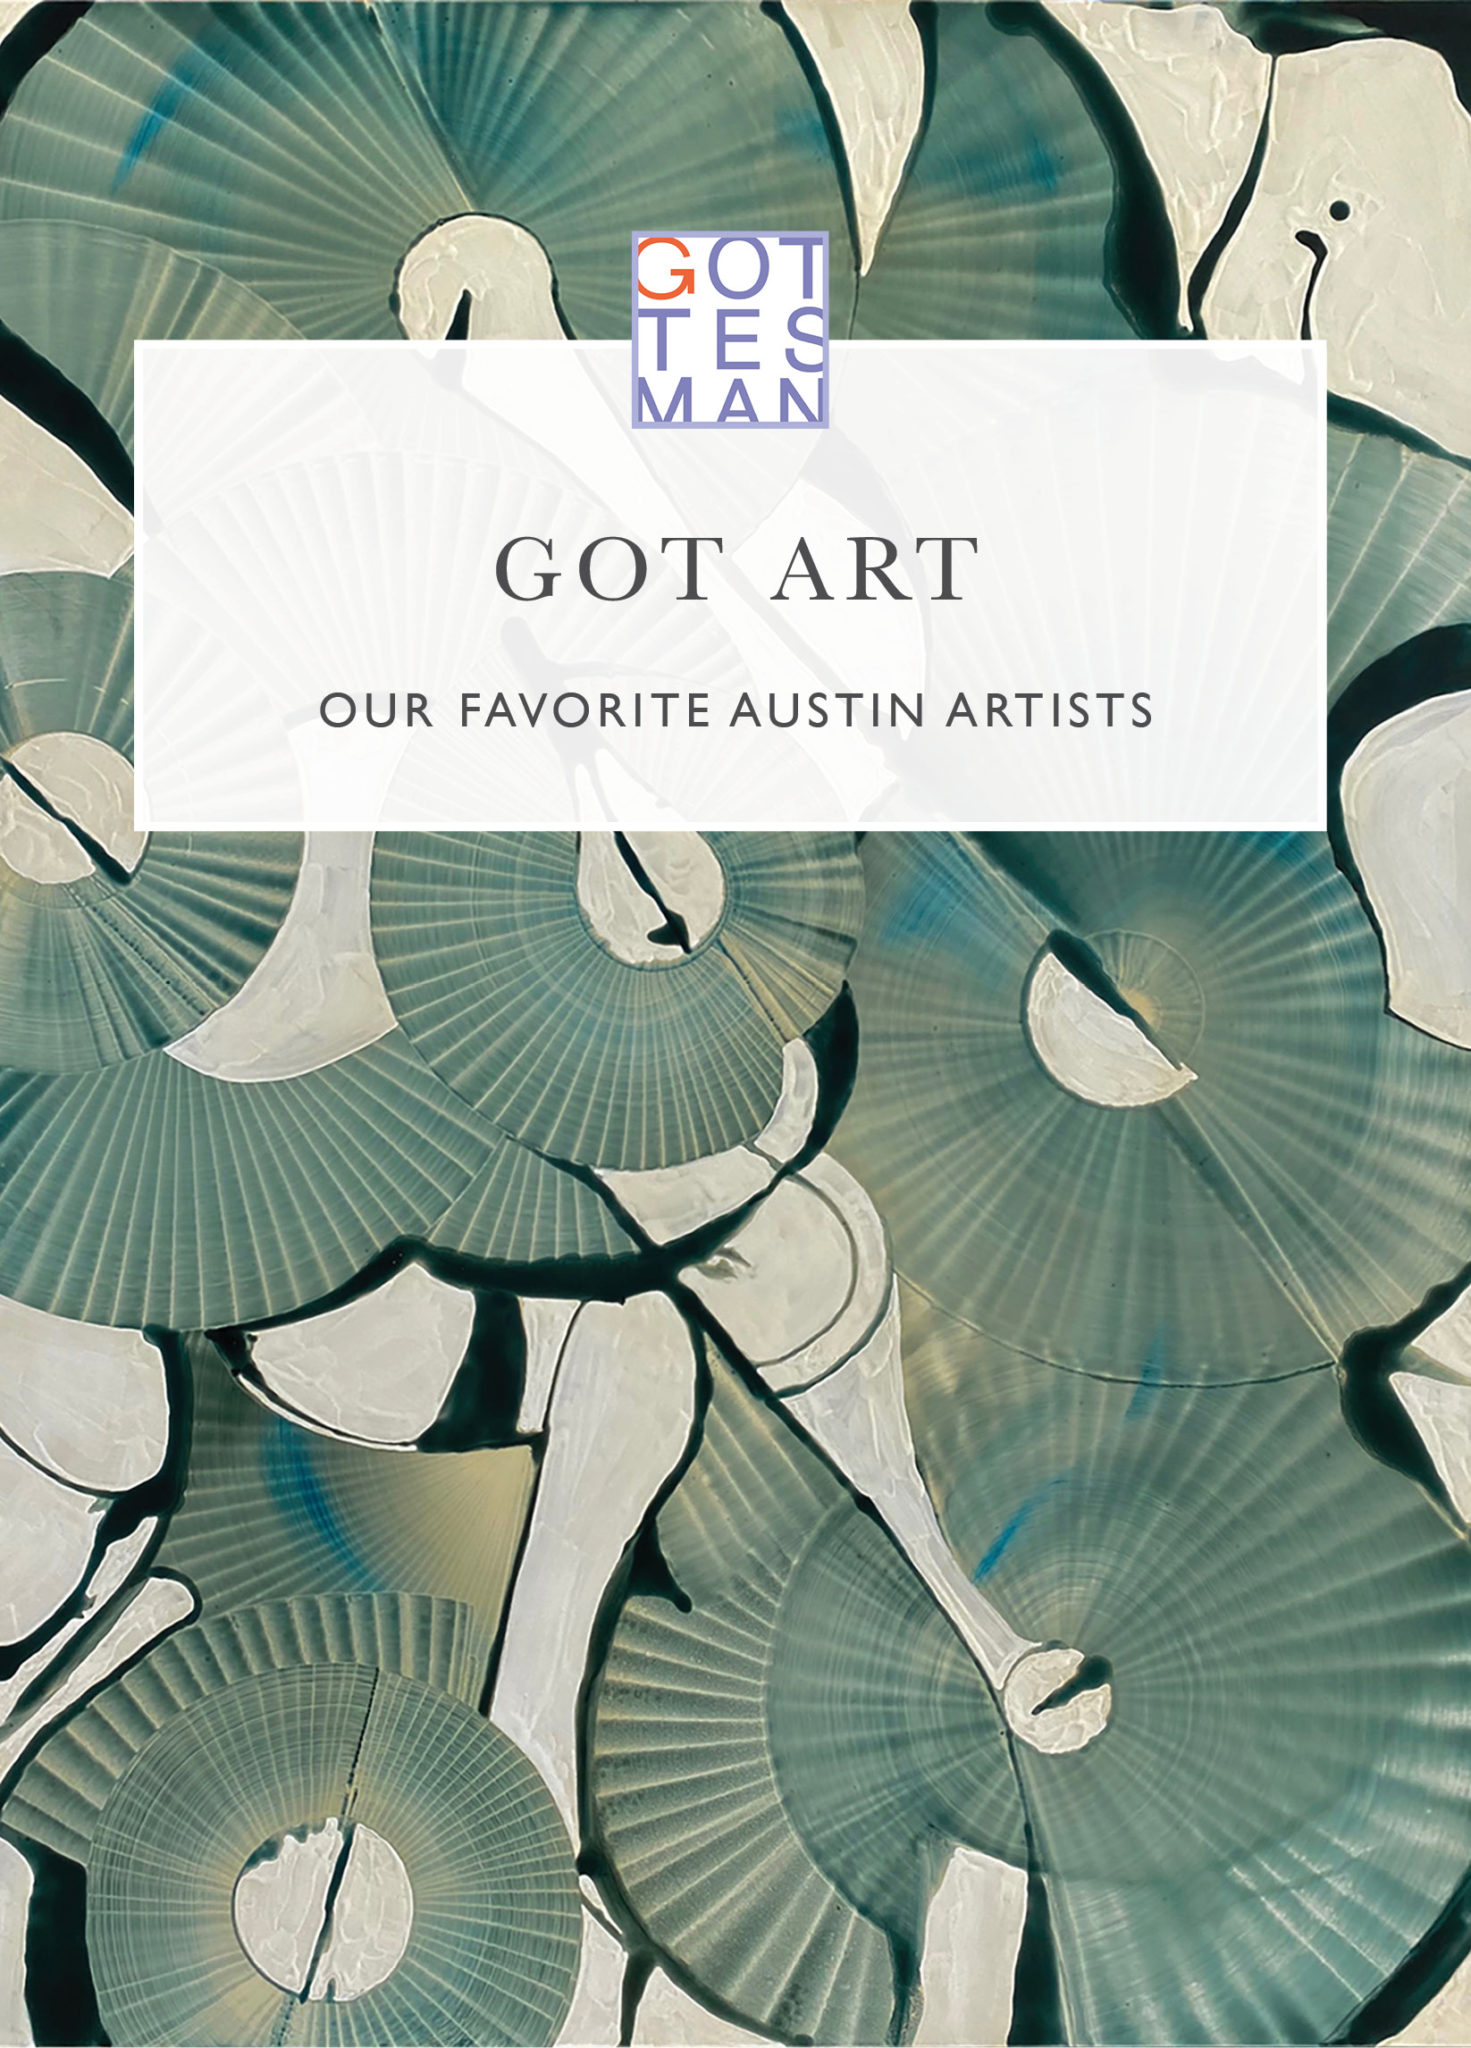 Artwork with text overlay, "Got Art: Our Favorite Austin Artists"